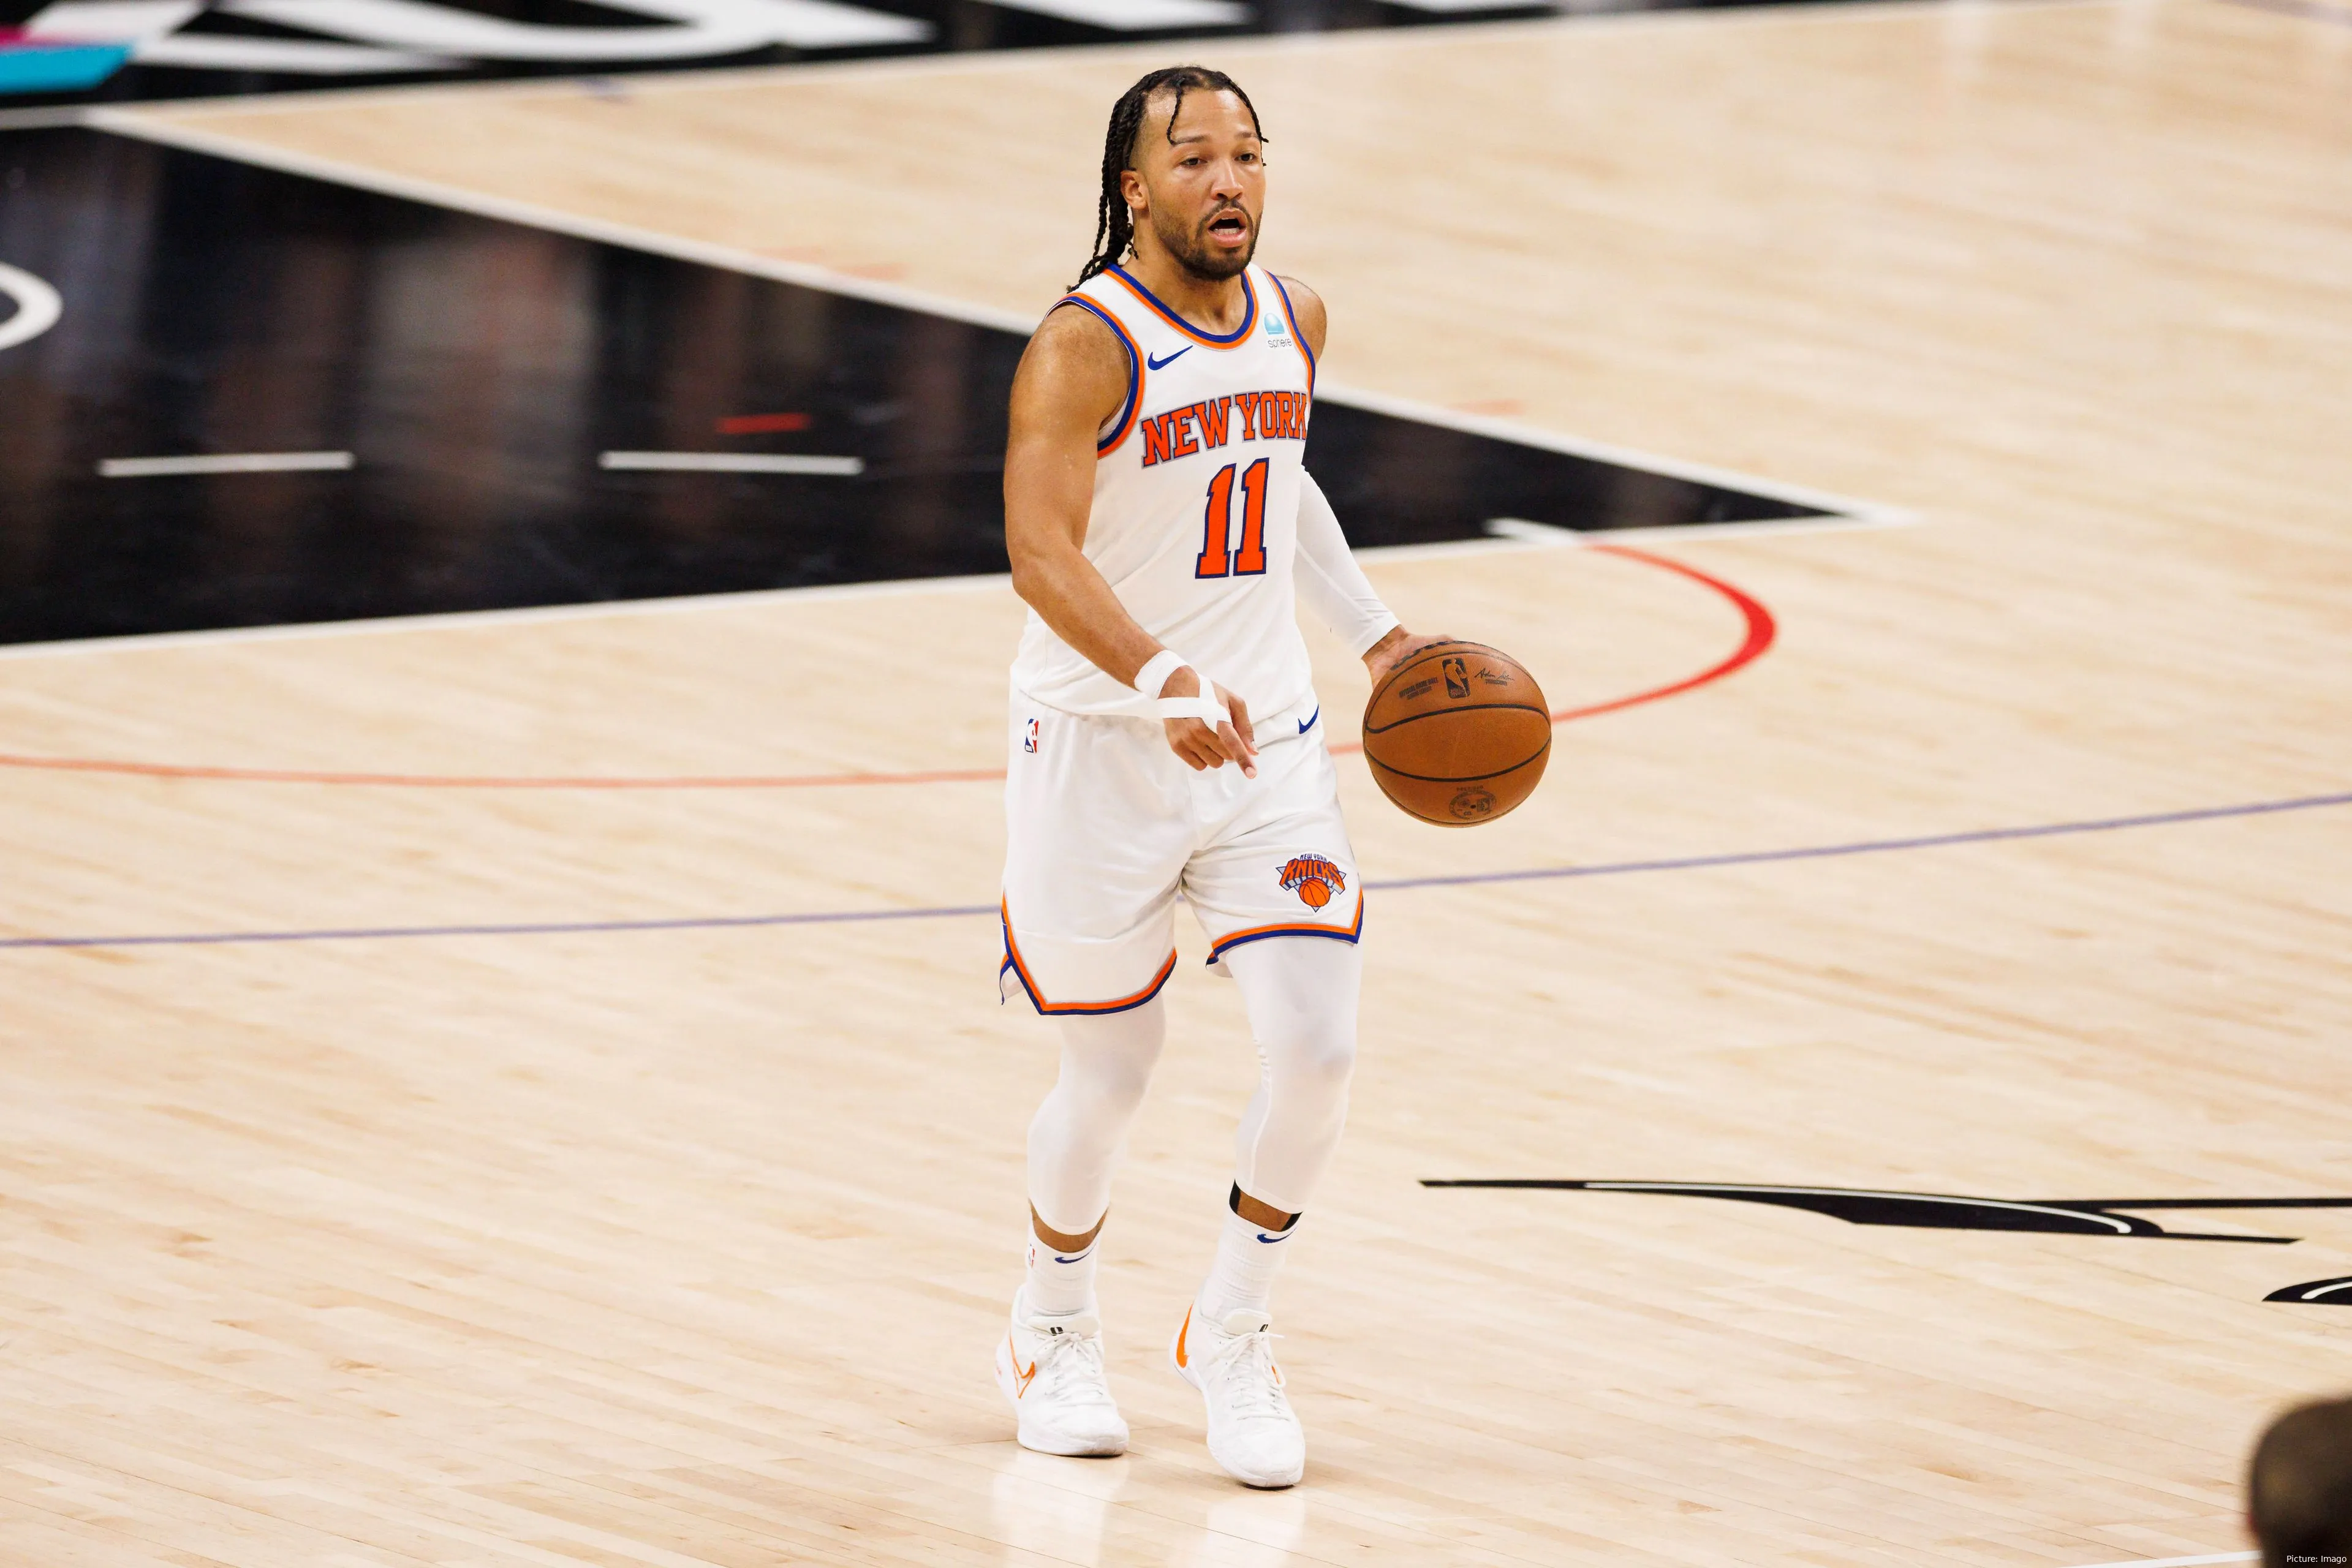 Jalen Brunson has been quietly making a case recently for the NBA MVP